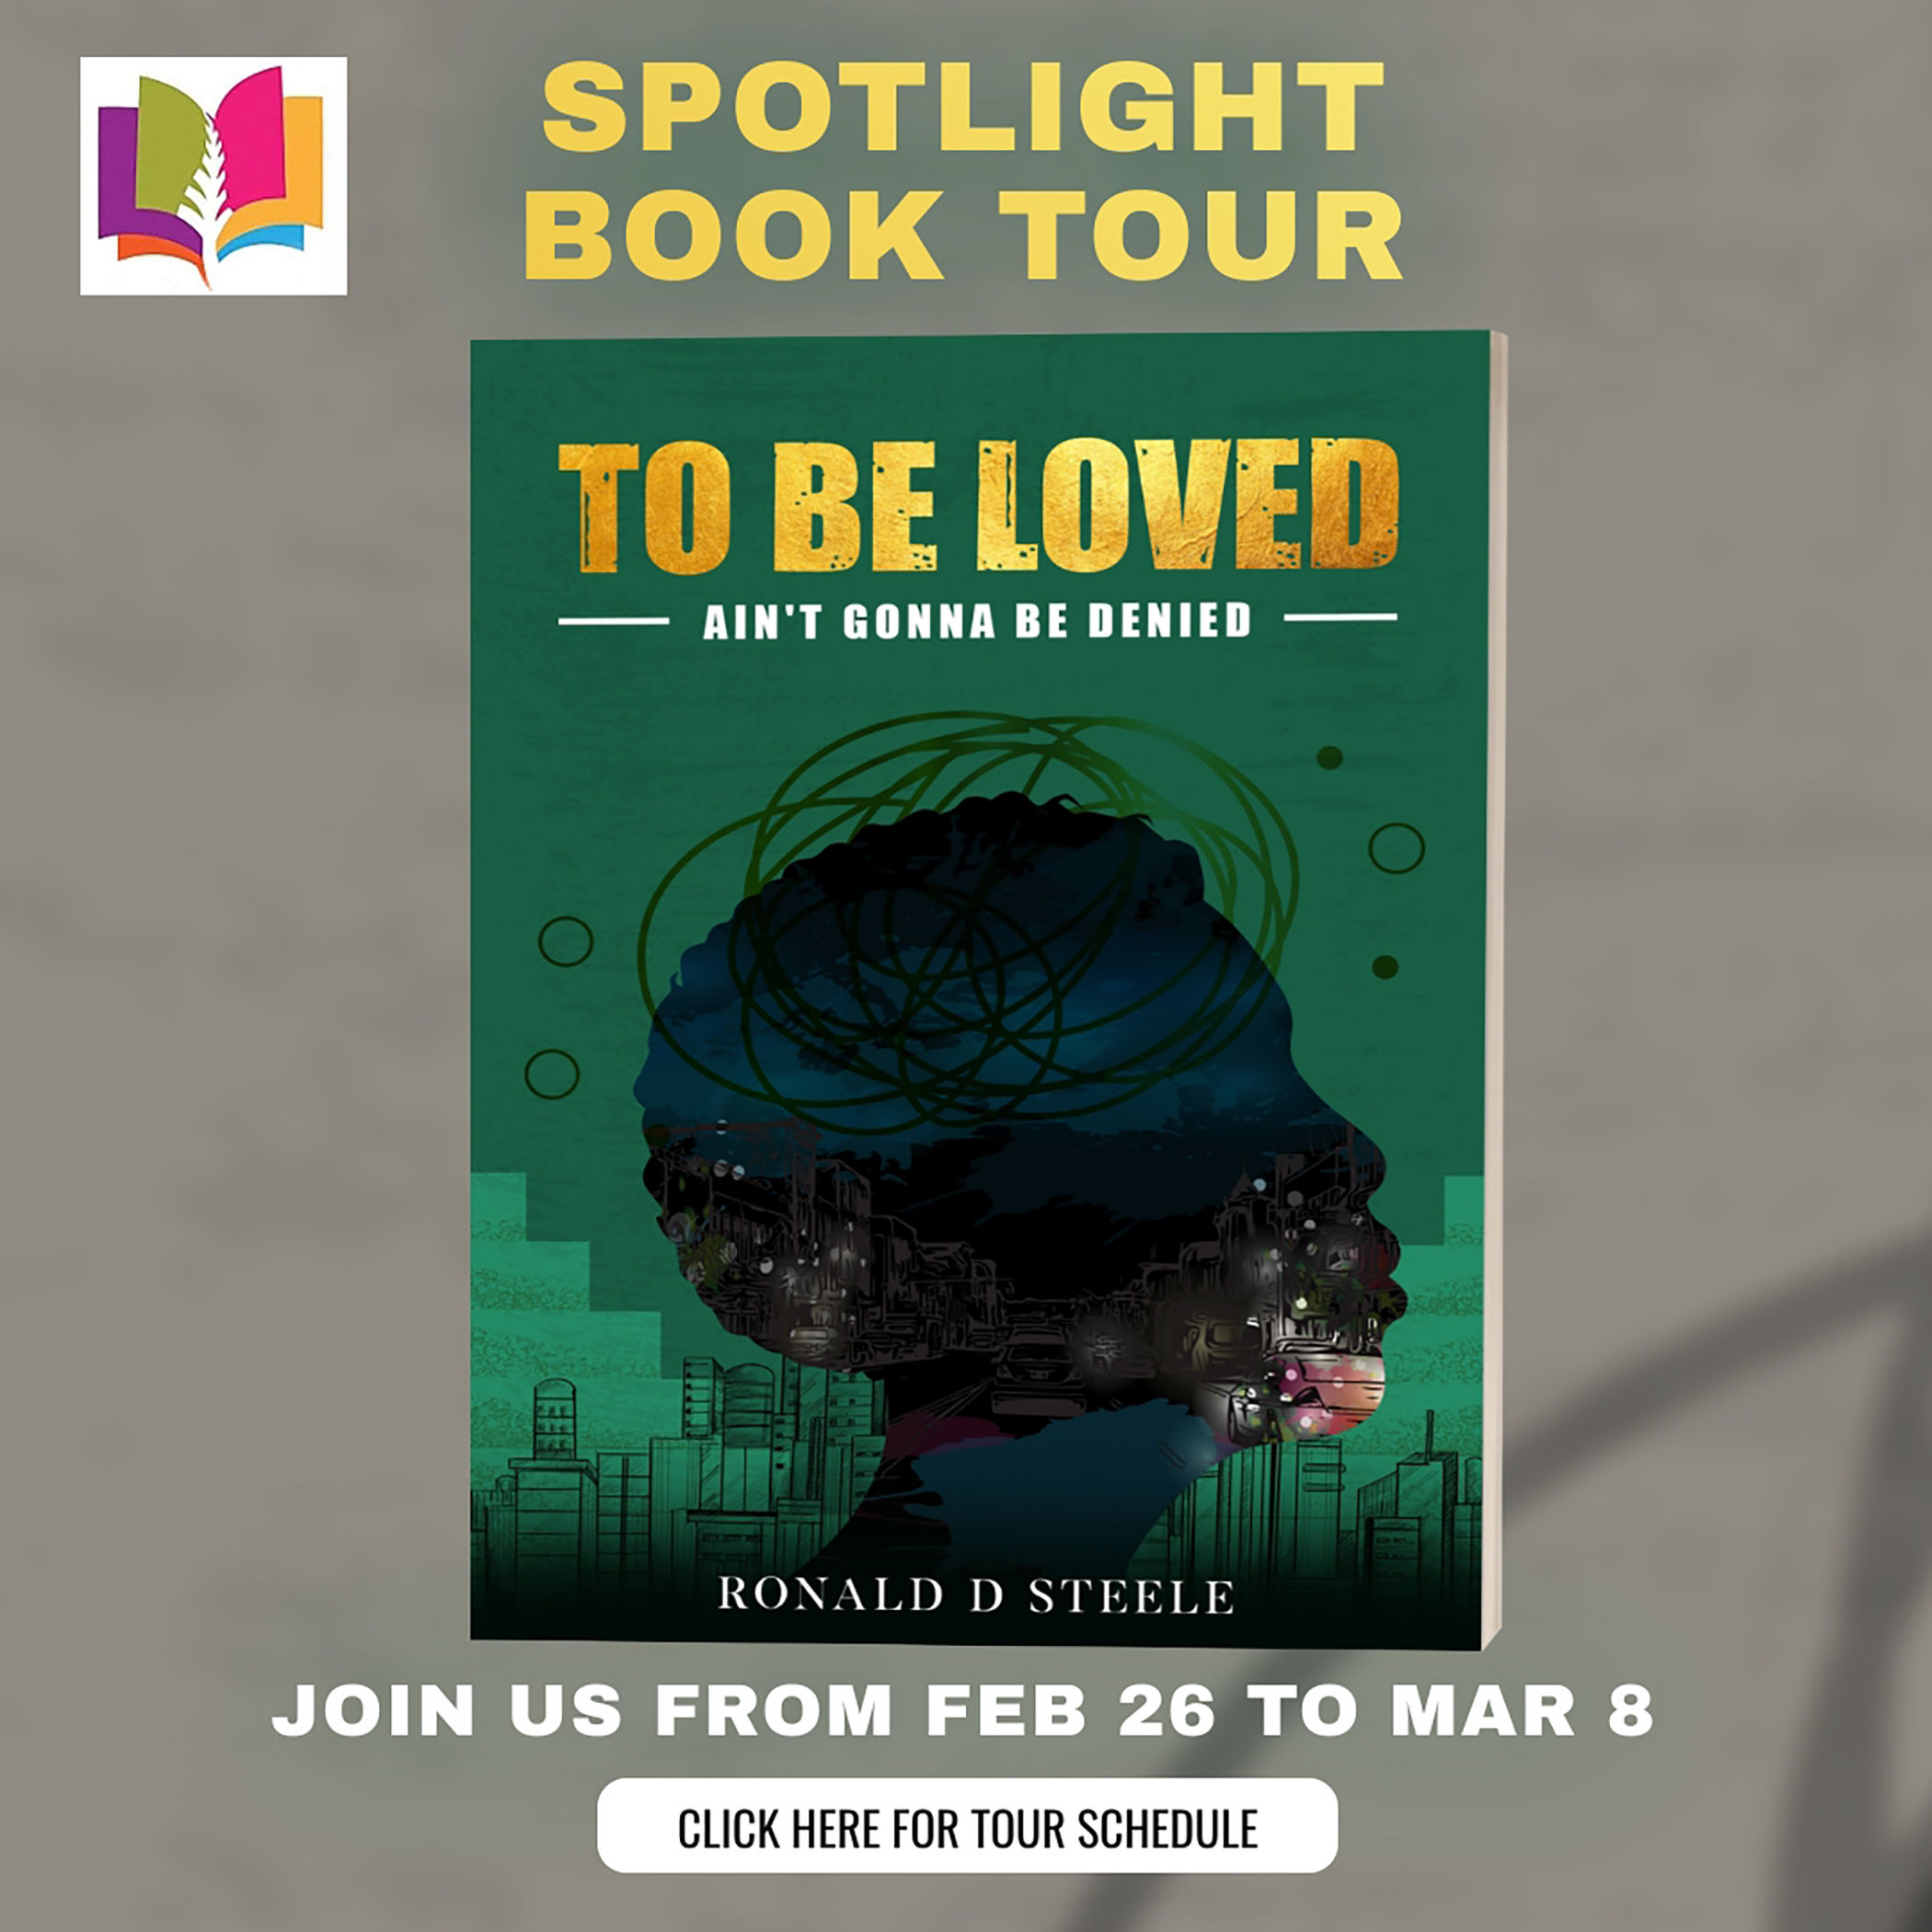 To Be Loved: Ain't Gonna Be Denied by Ronald D. Steele | Inspiring! #Memoir #Autobiography @iReadBookTours @RonaldDSteele #IndieAuthor